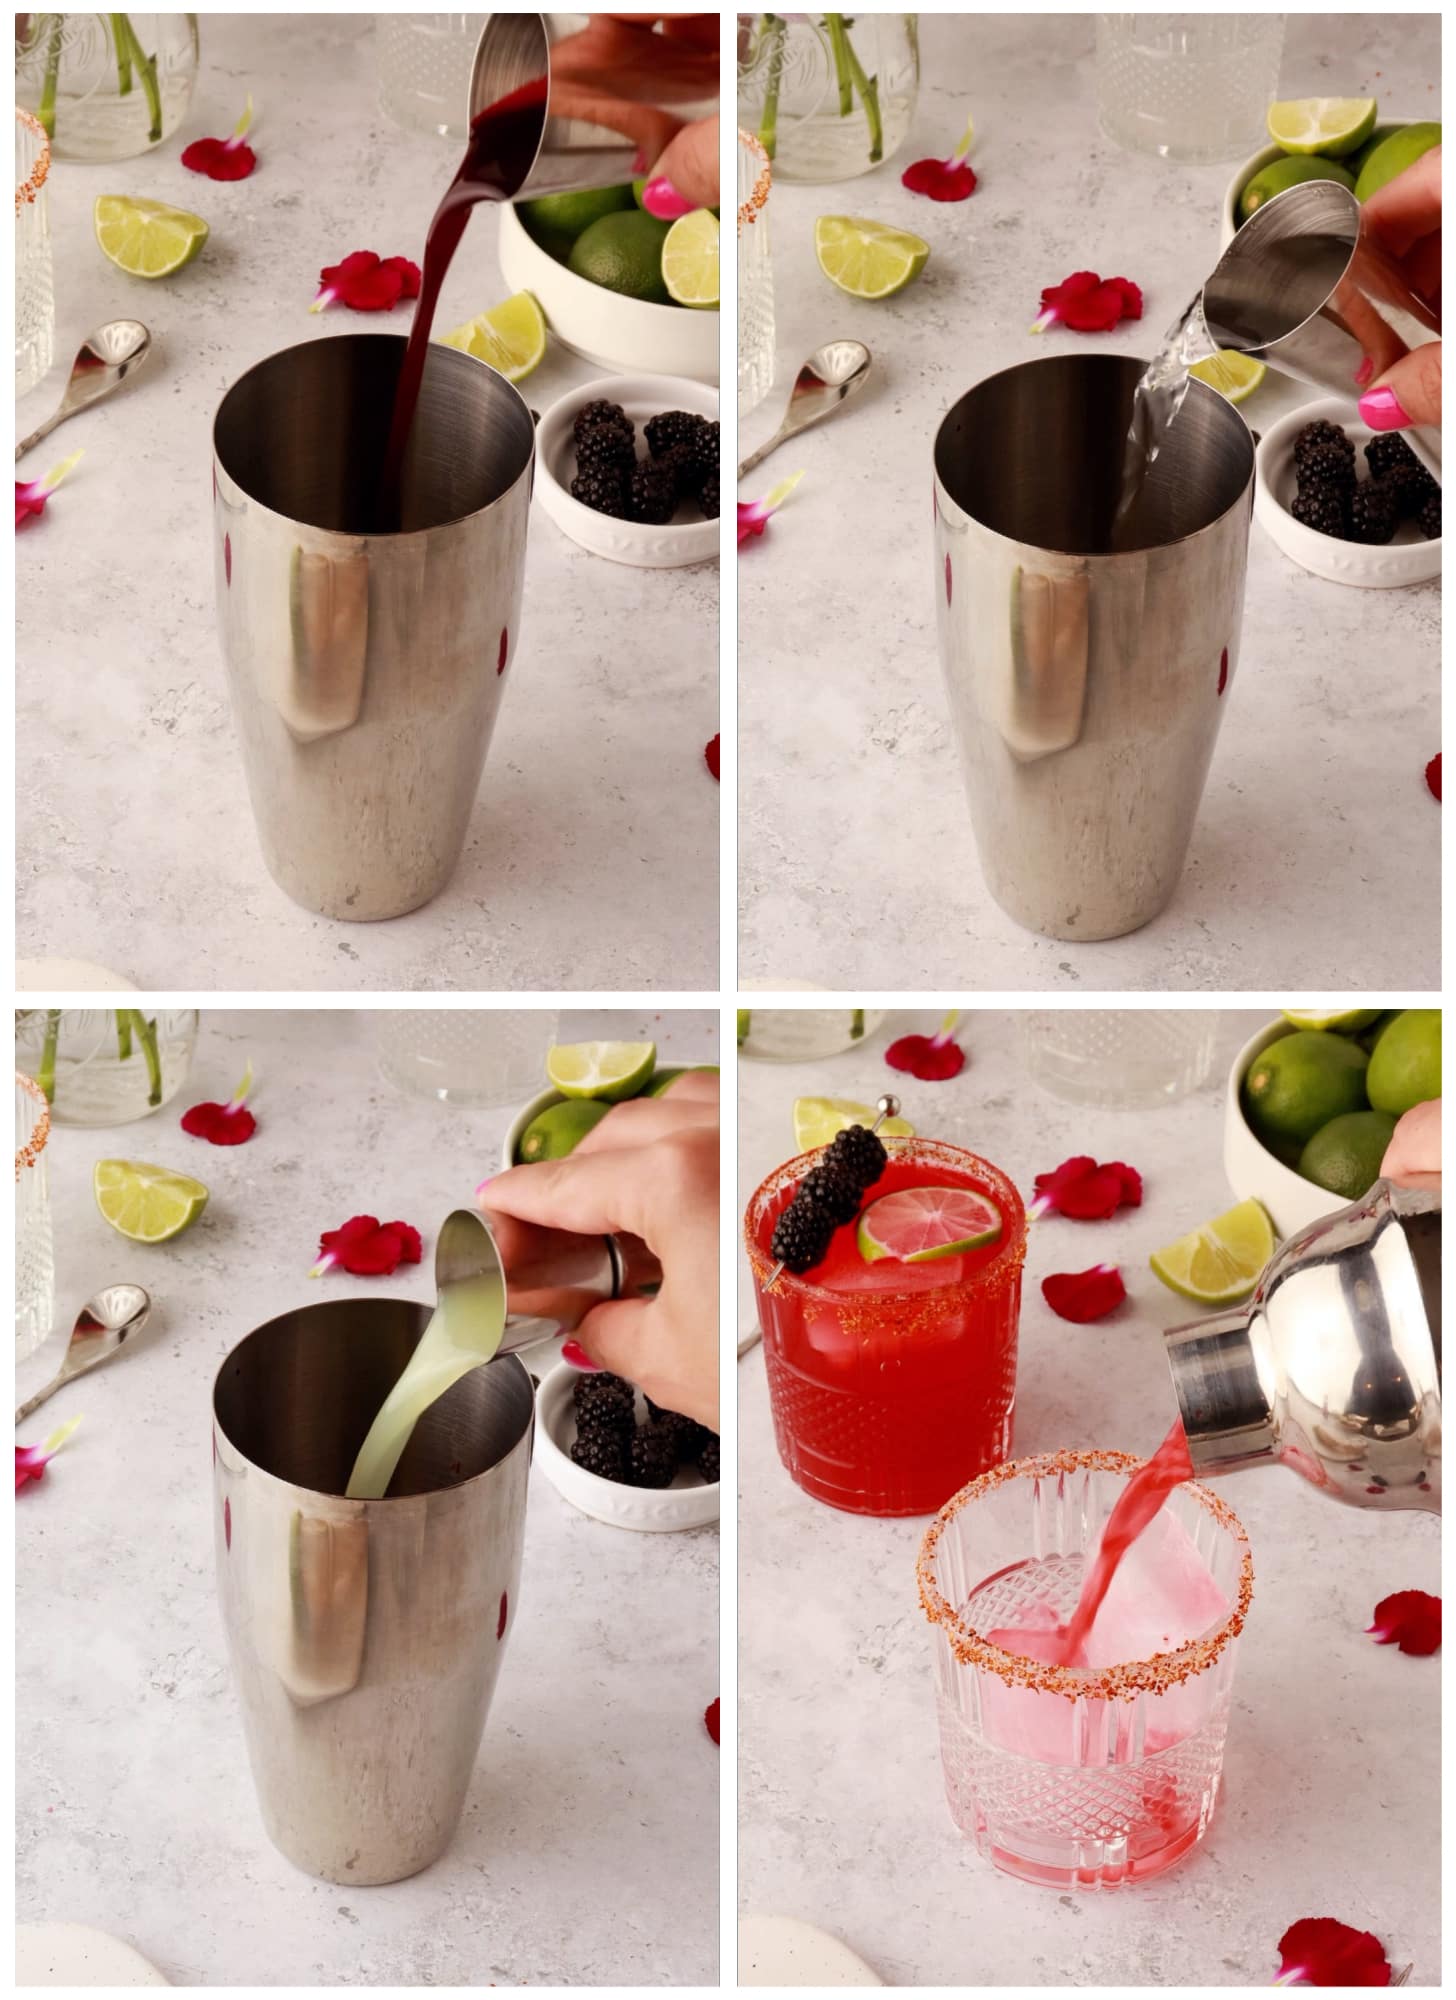 photo collage demonstrating how to make blackberry margarita in a cocktail shaker